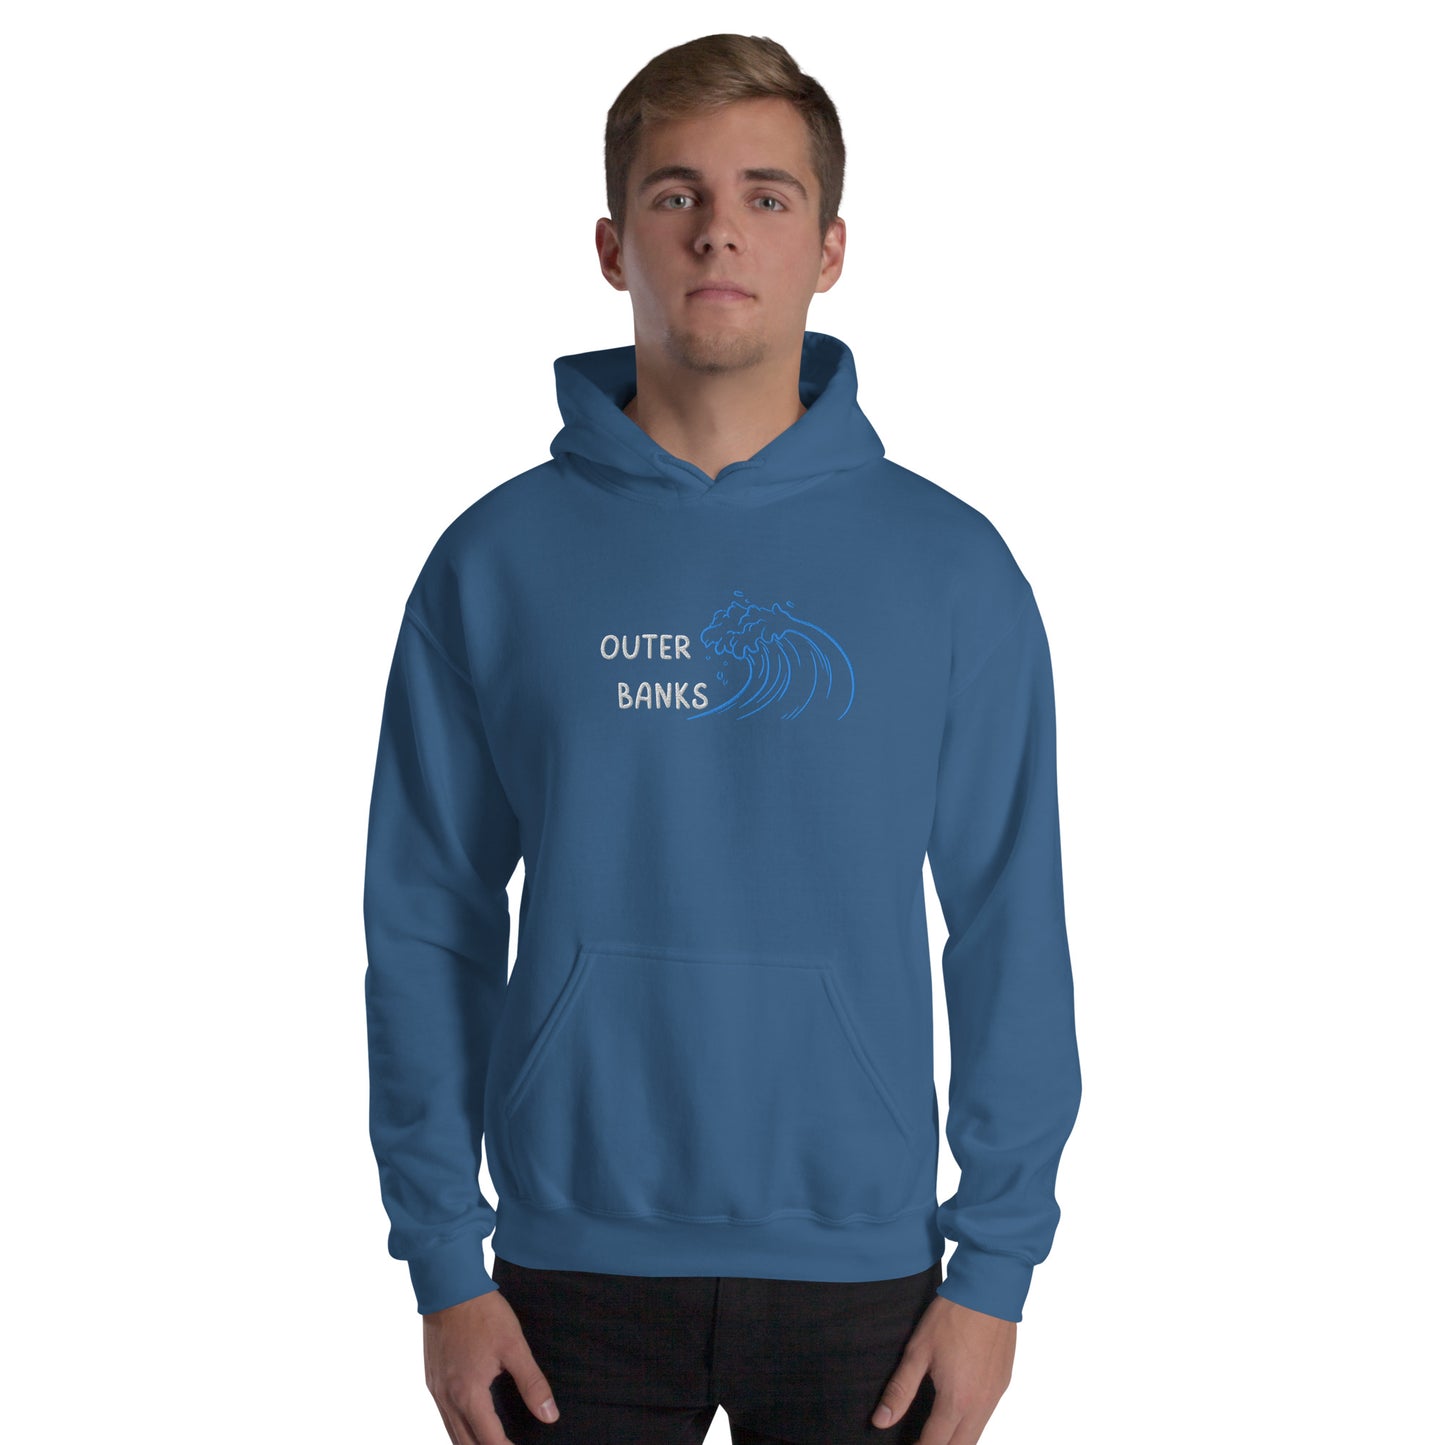 Outer Banks Wave Unisex Hoodie